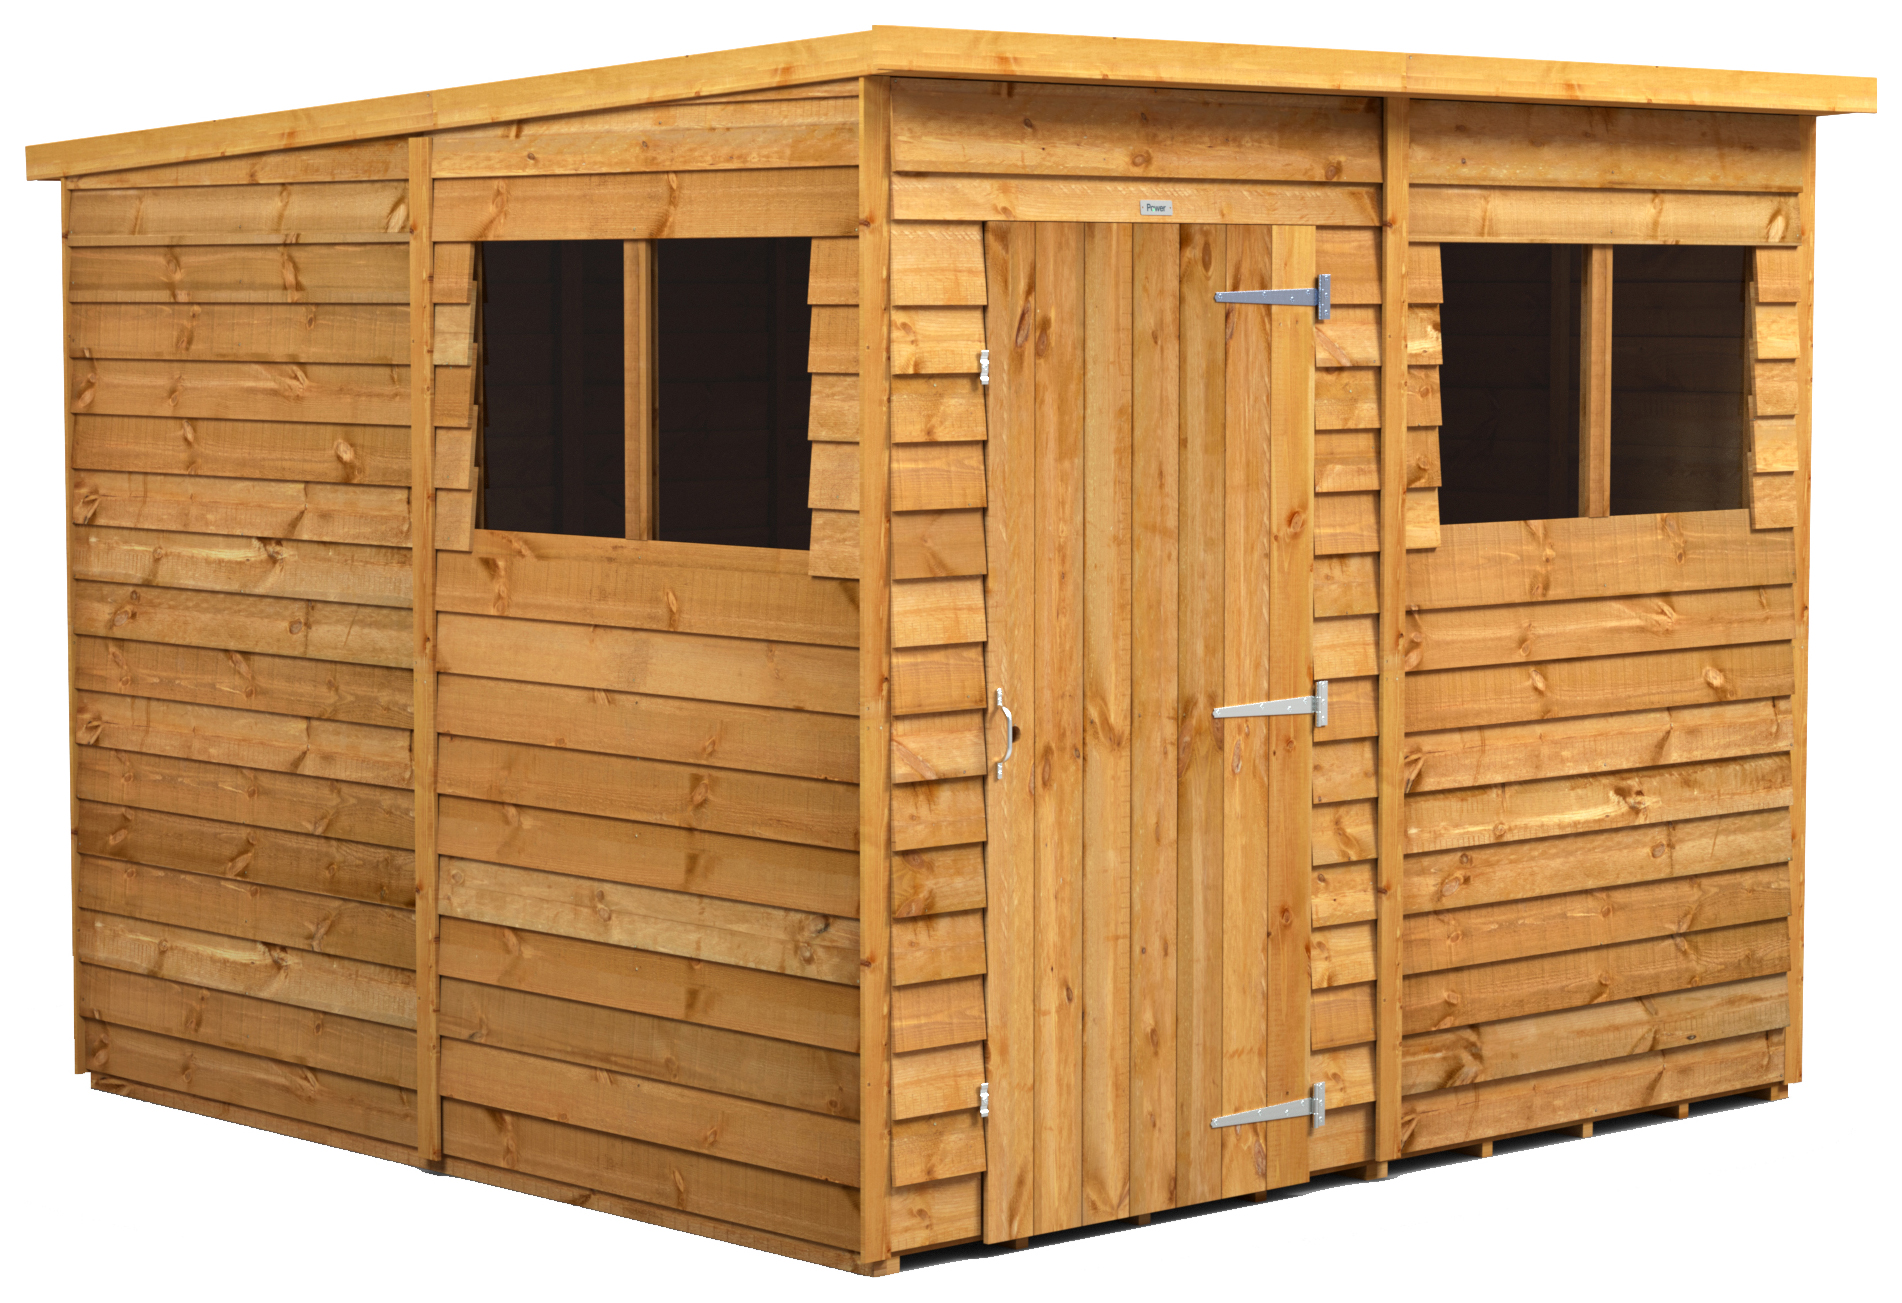 Power Sheds Pent Overlap Dip Treated Shed - 8 x 8ft